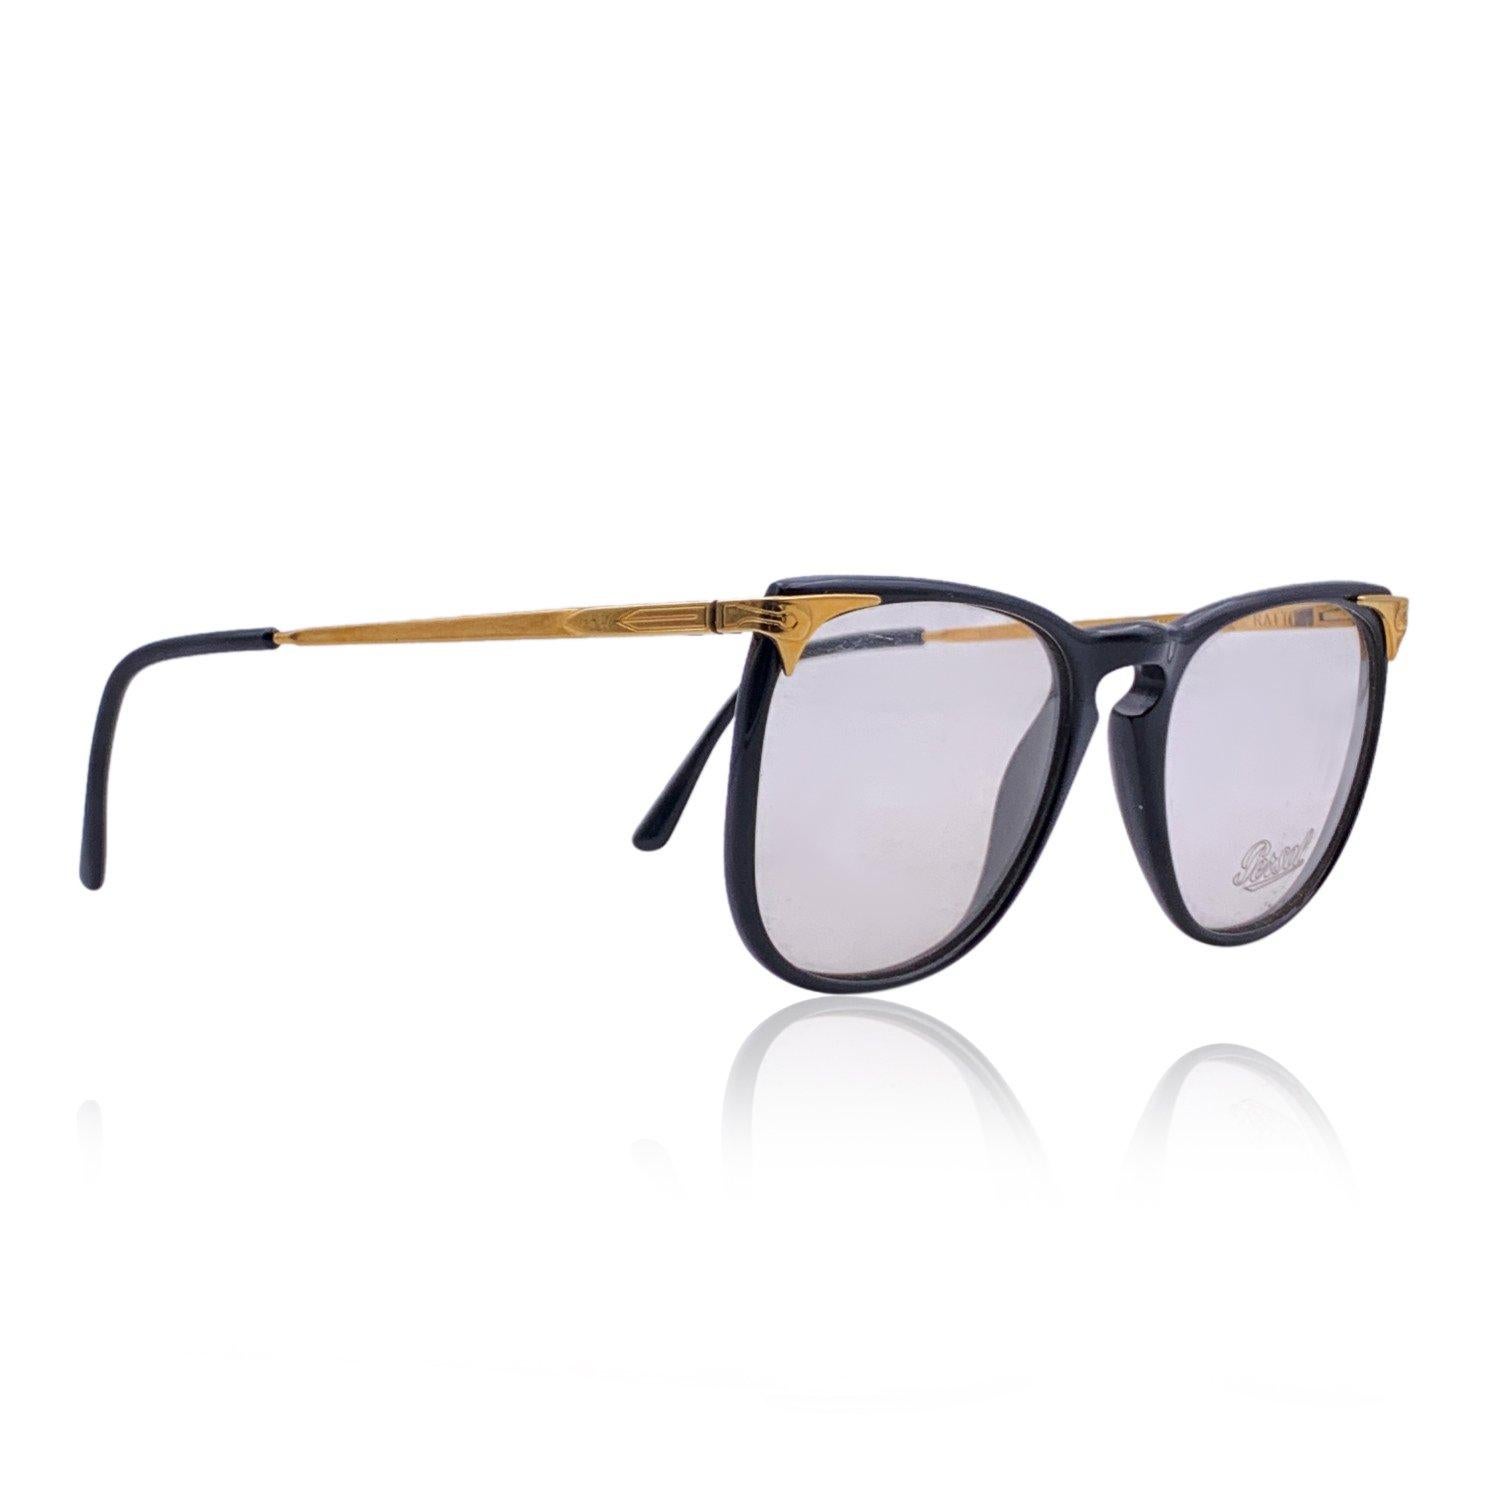 PERSOL Meflecto Ratti Vintage Eyeglasses- Model: Cellor3. Black acetate frame with gold metal details on corners. Clear demo lenses. Flexible temples. Made in Italy. Style & Refs: Cellor 3 - 51/71 Details MATERIAL: Acetate COLOR: Black MODEL: Cellor